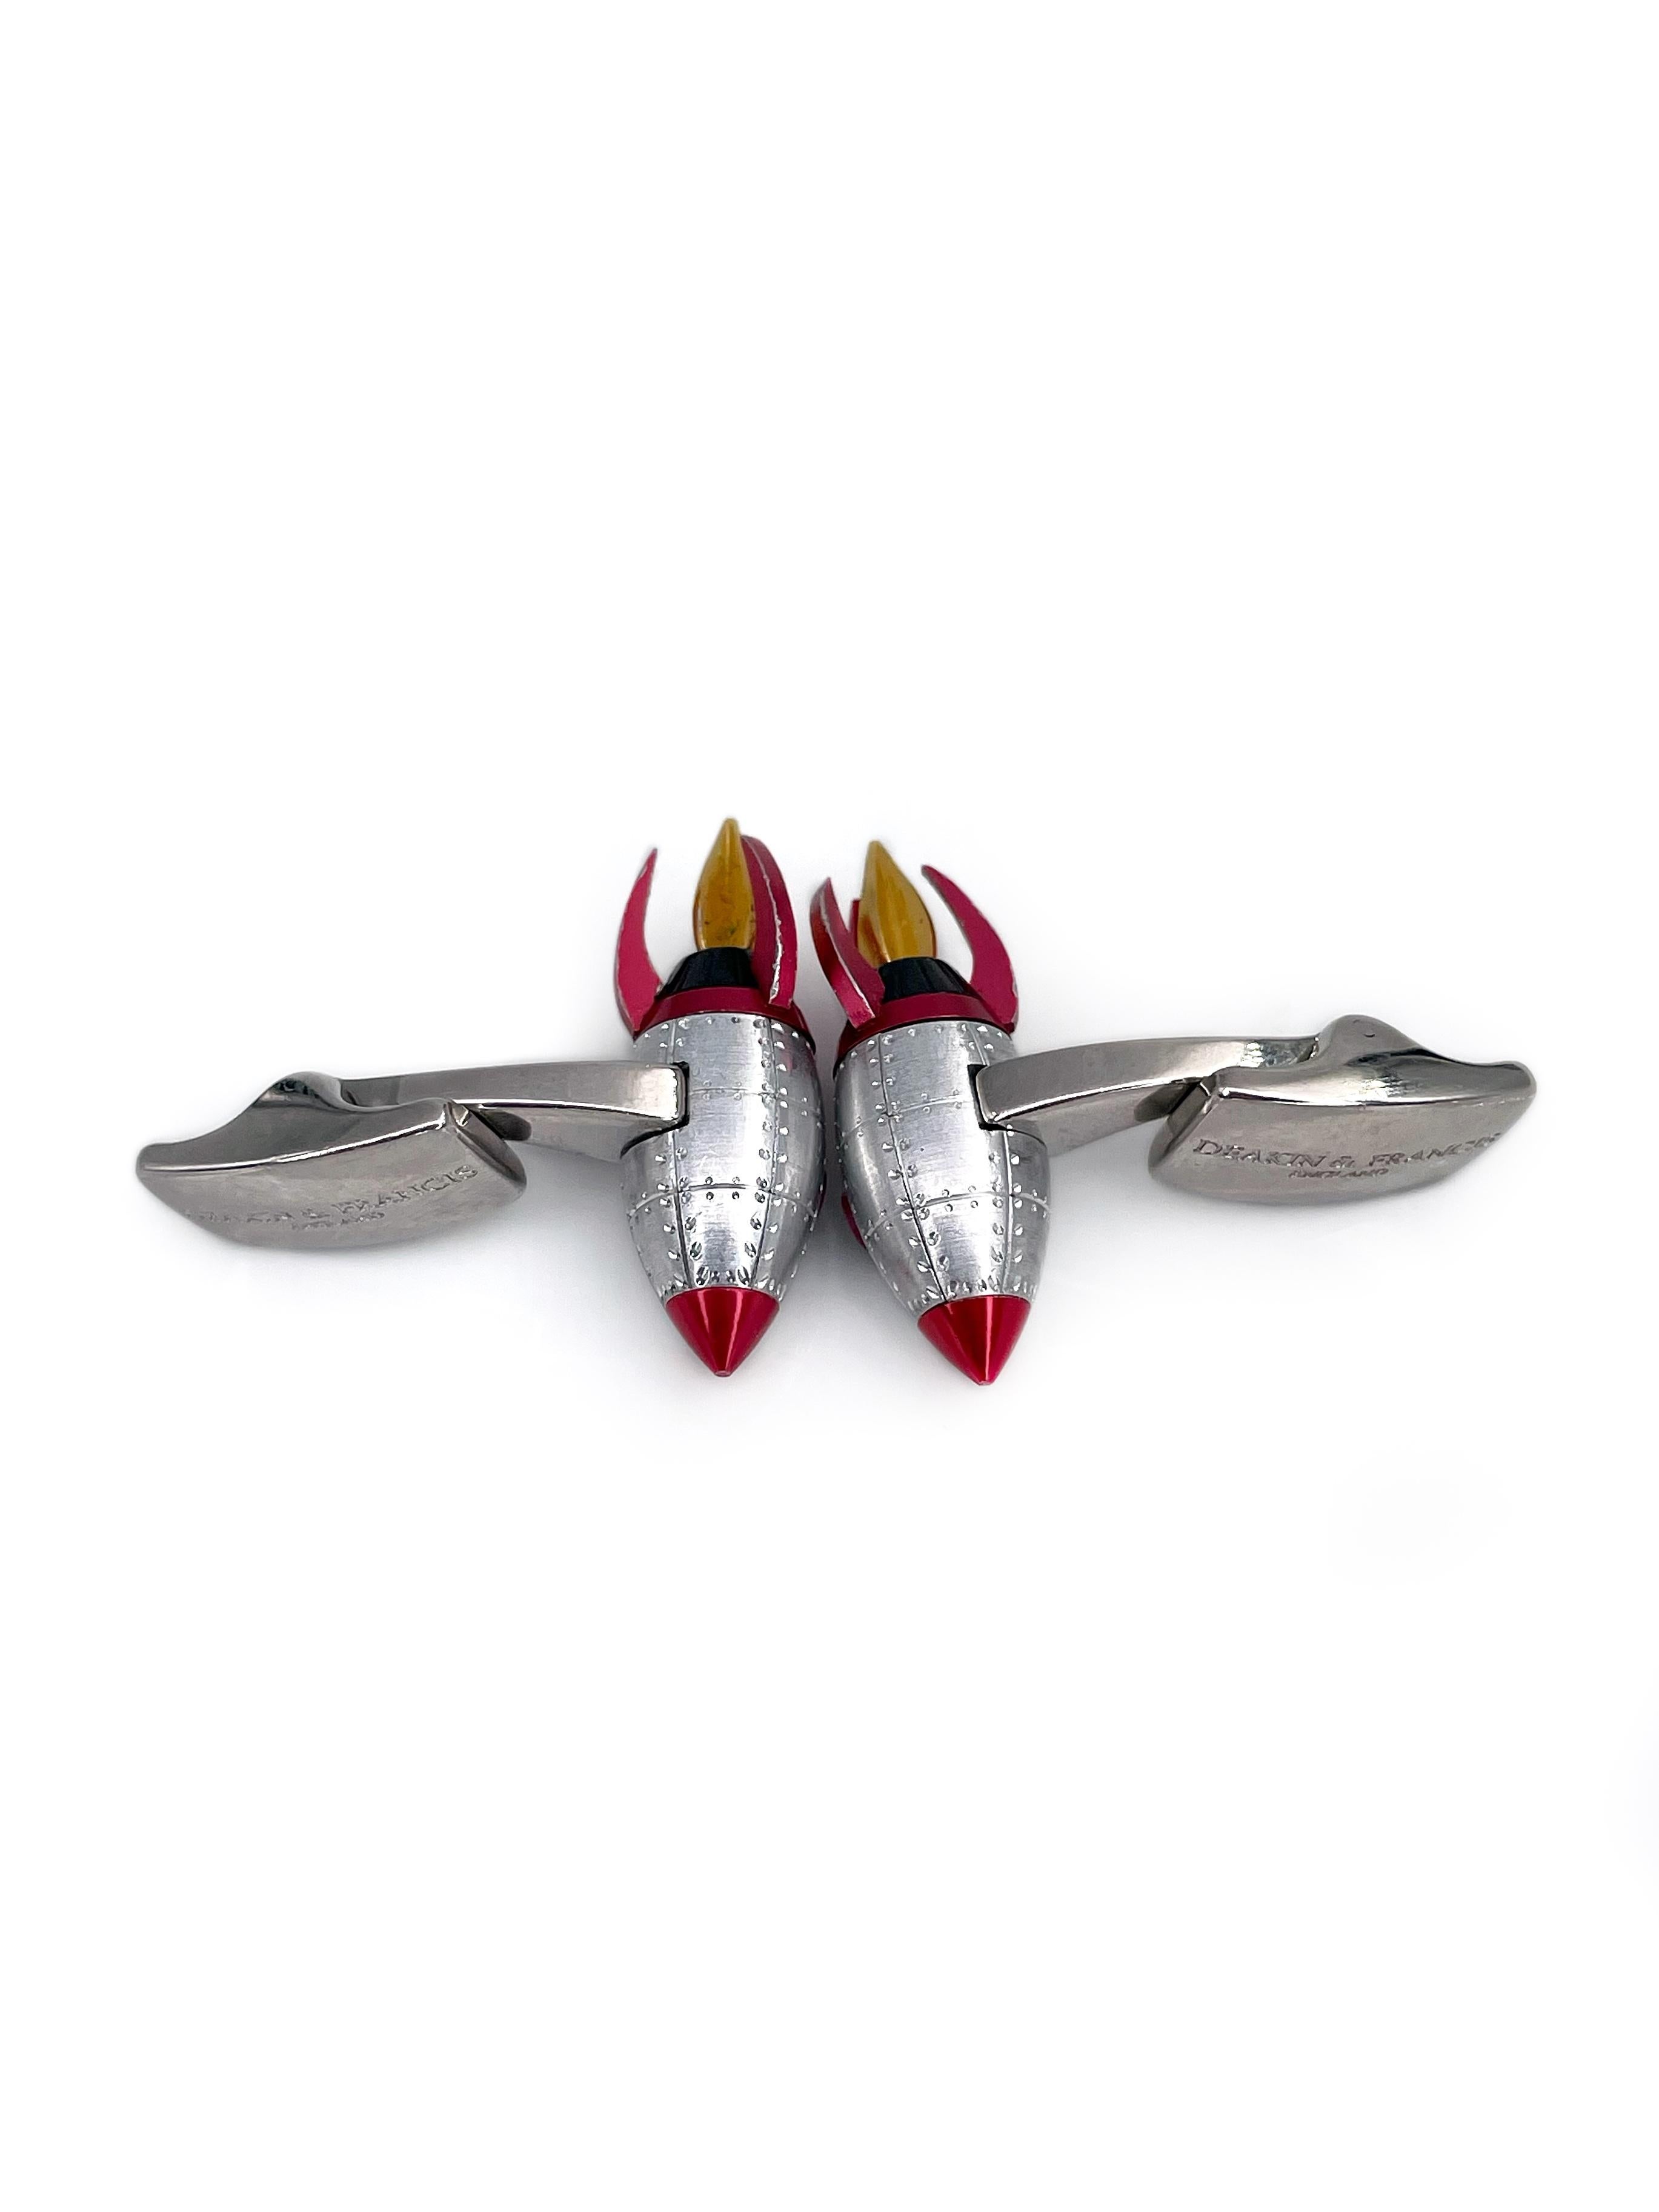 This is a playful pair of rocket cufflinks designed by Deakin & Francis in 2010’s. The piece is crafted in shiny base metal. It features red and yellow enamel details. By pulling down the lever on the back the flame shoots out of the bottom. It is a